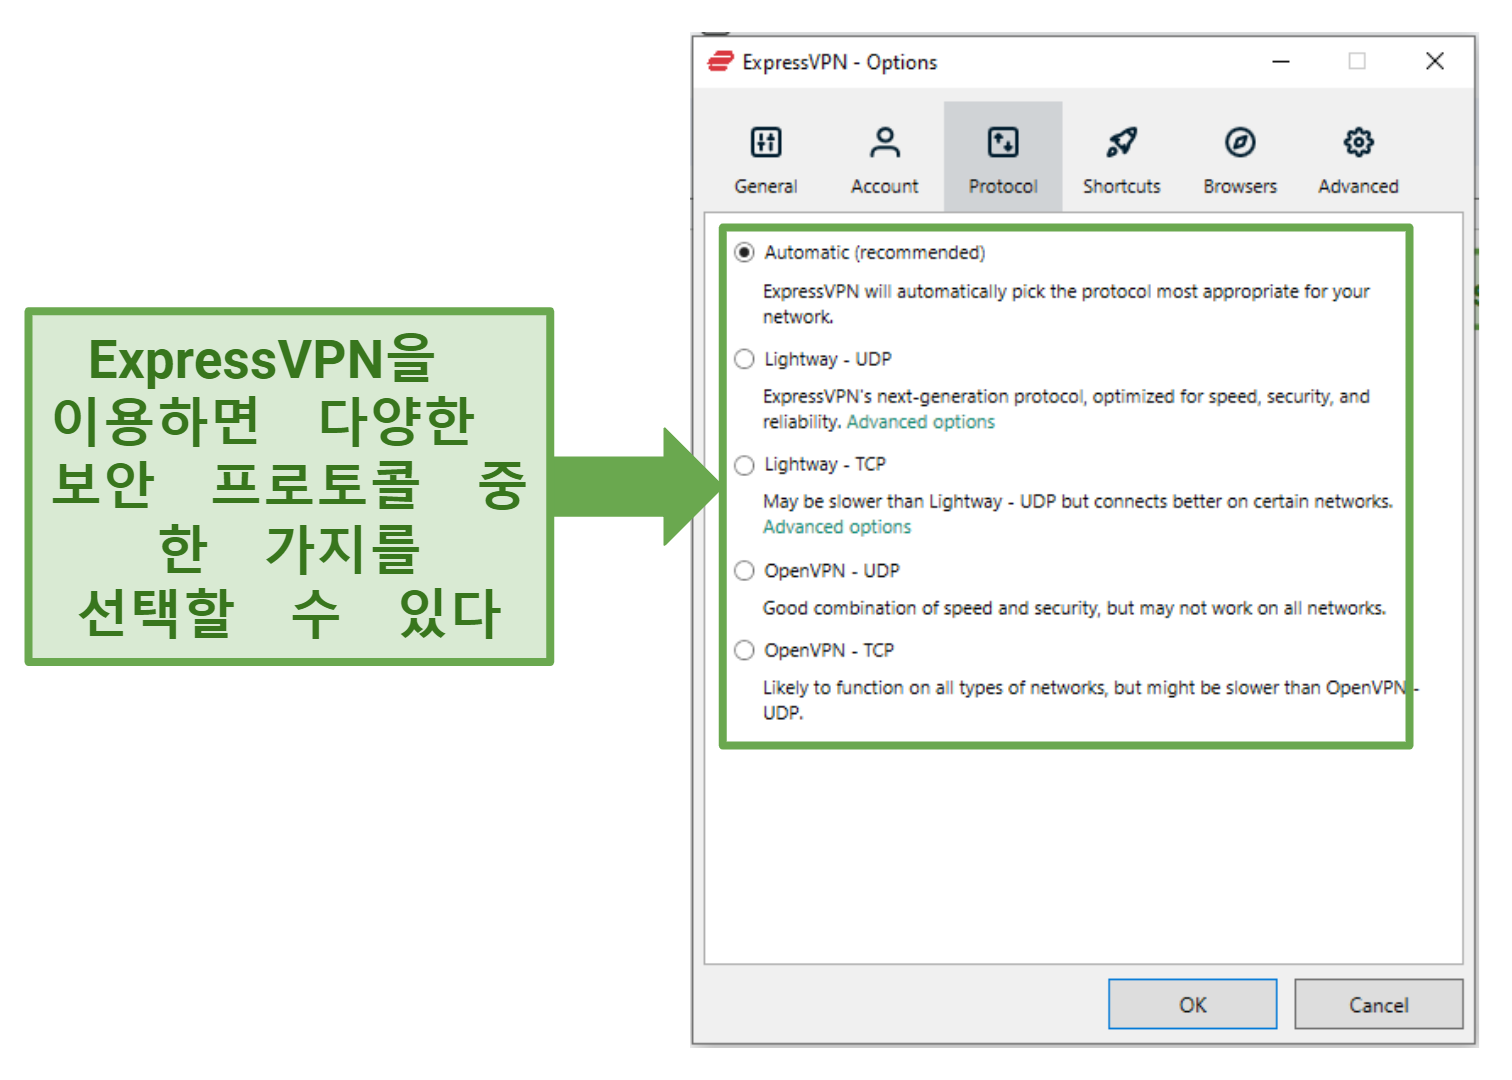 Screenshot of the ExpressVPN interface showing available VPN protocols